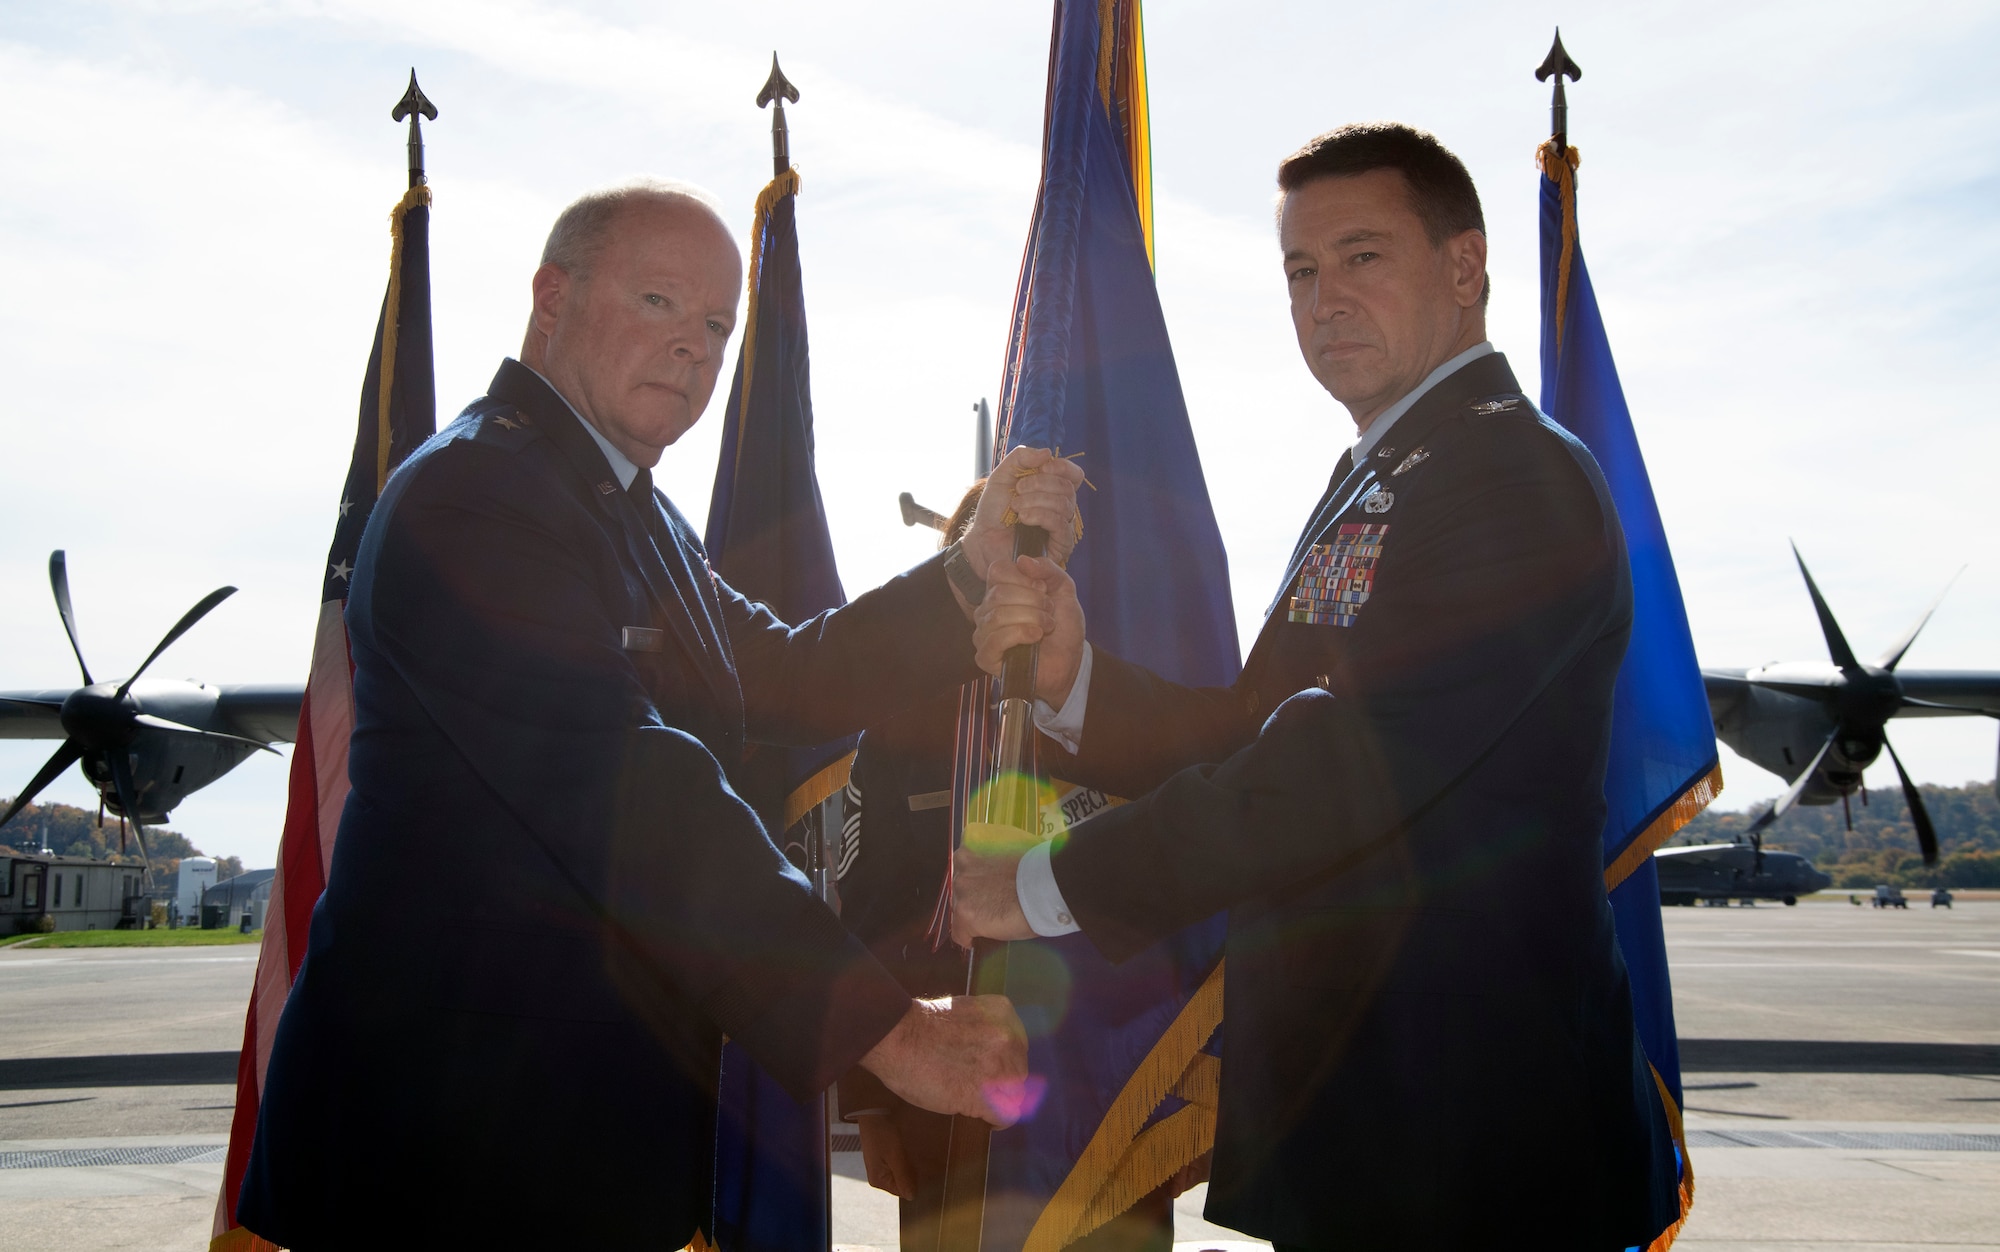 Brig. Gen. Michael Regan, Pennsylvania Air National Guard commander (left) and Col. Edward Fink Jr., 193rd Special Operations Wing commander (right) exchange the guidon at an assumption of command ceremony Oct. 28, 2022, Middletown, Pennsylvania.